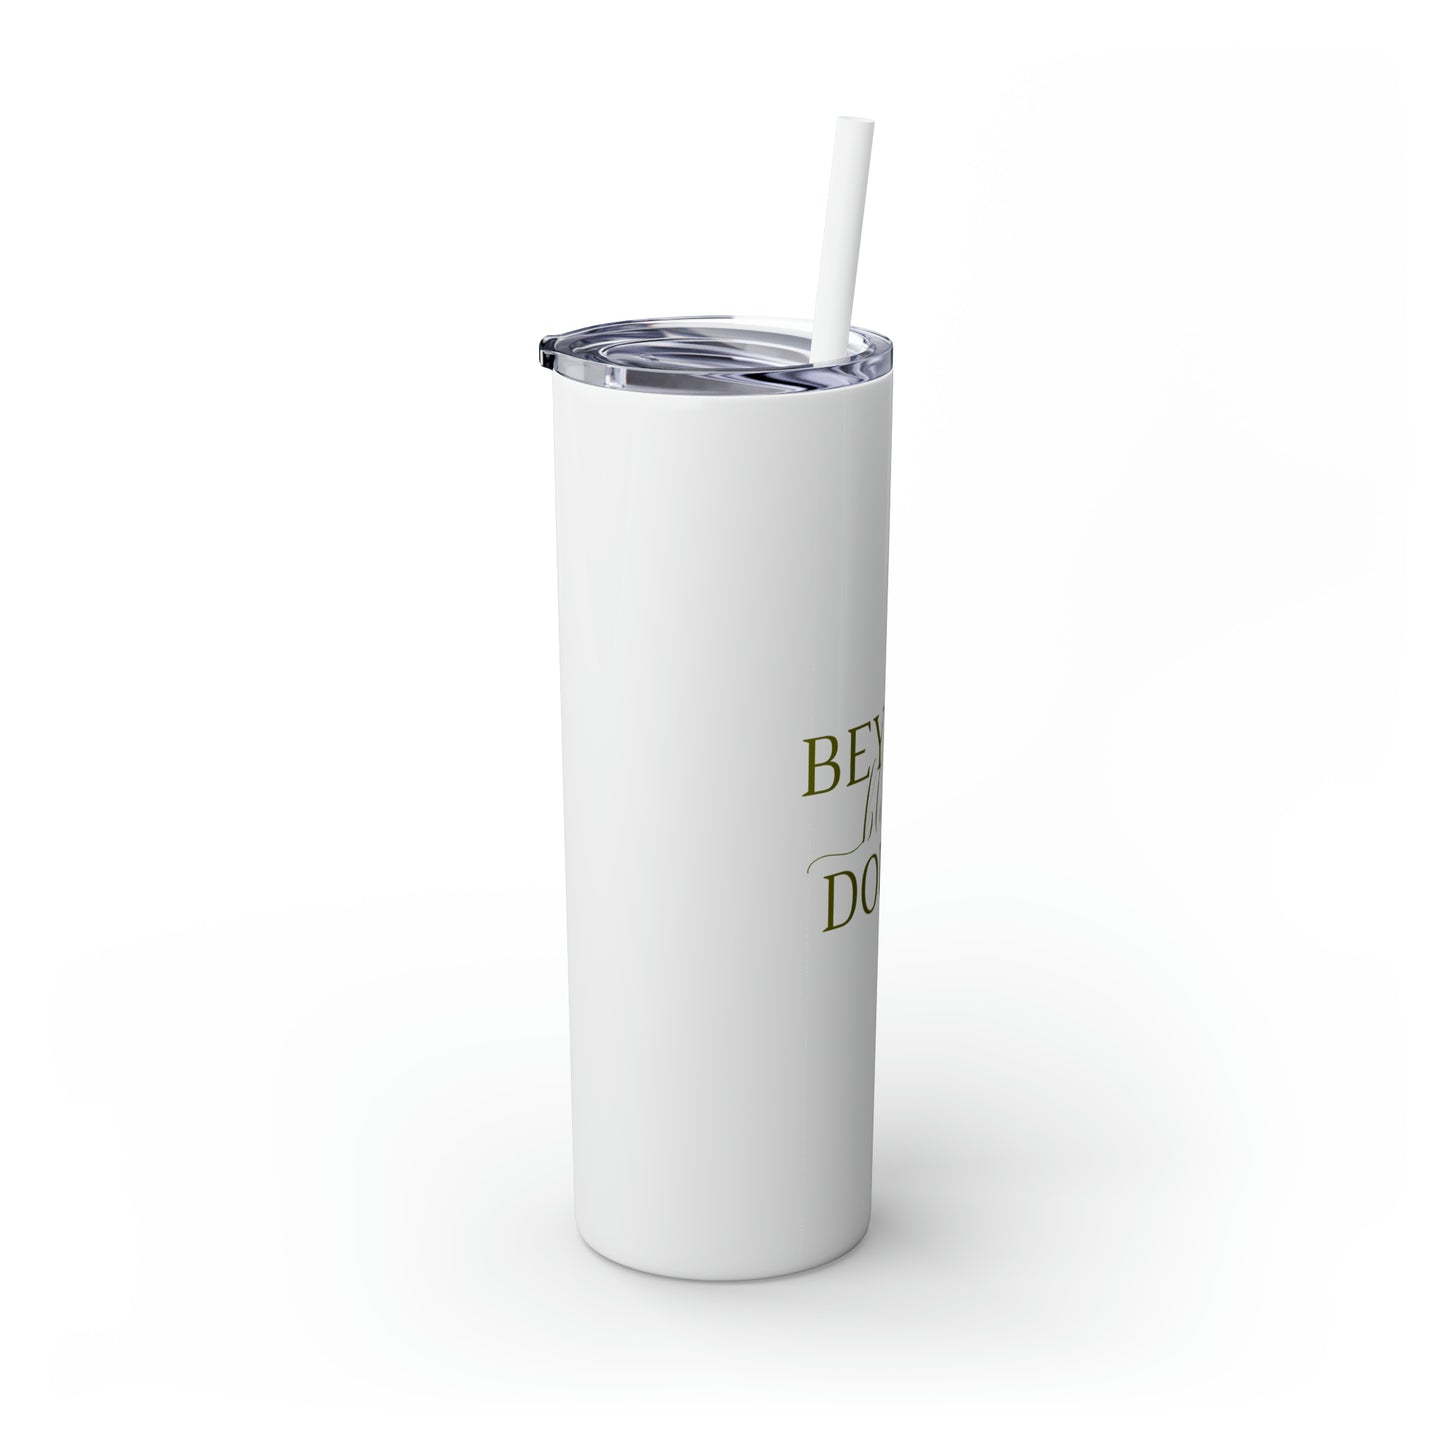 Beyond Blessed Doula - Plain Skinny Tumbler with Straw, 20oz - Olive Green